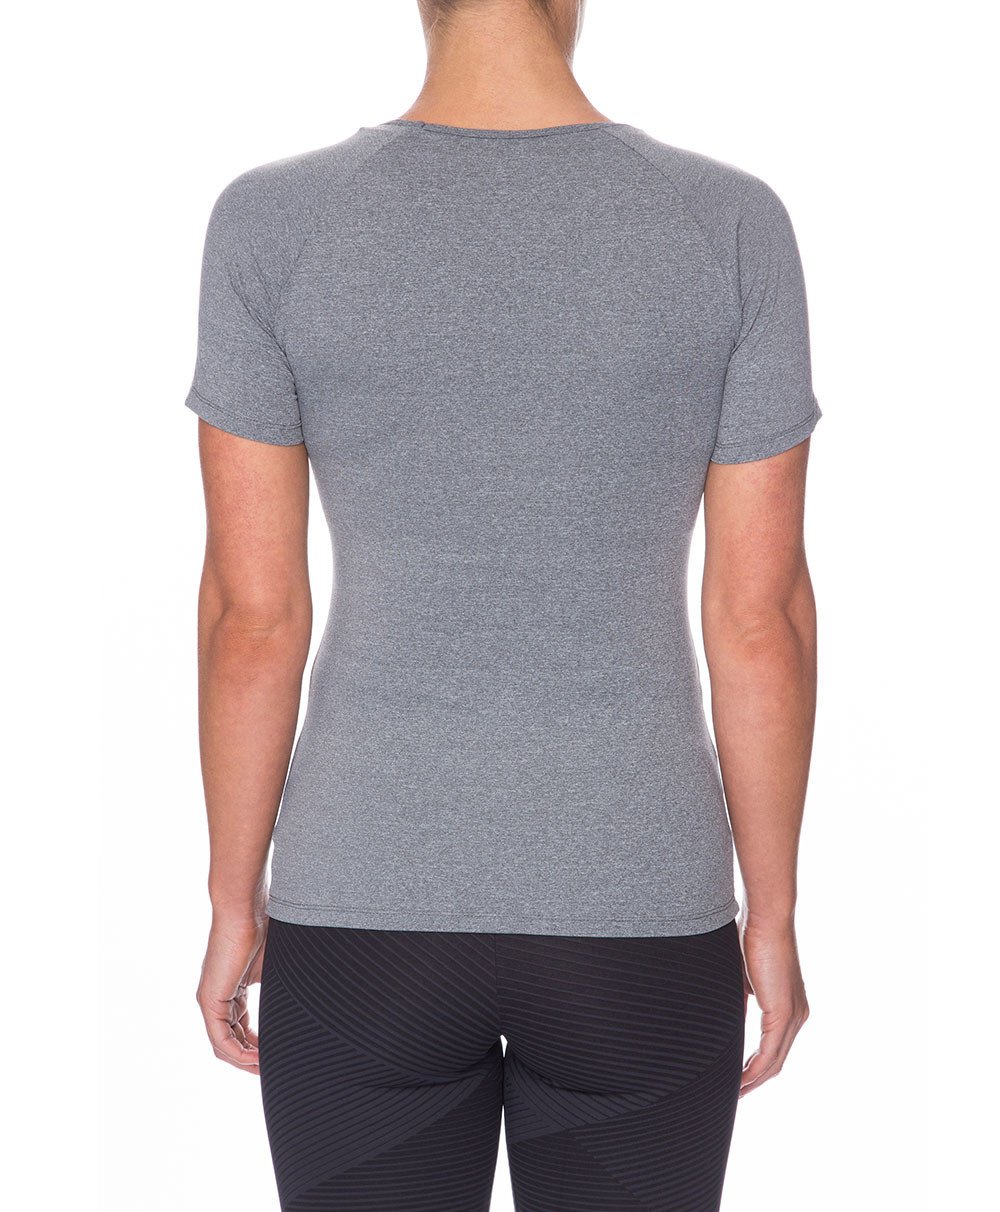 Front view product image with model for Brasilfit activewear Q T-shirt in gray.  The Q T-shirt is part of our basics activewear collection that is focused on performance, high compression activewear.